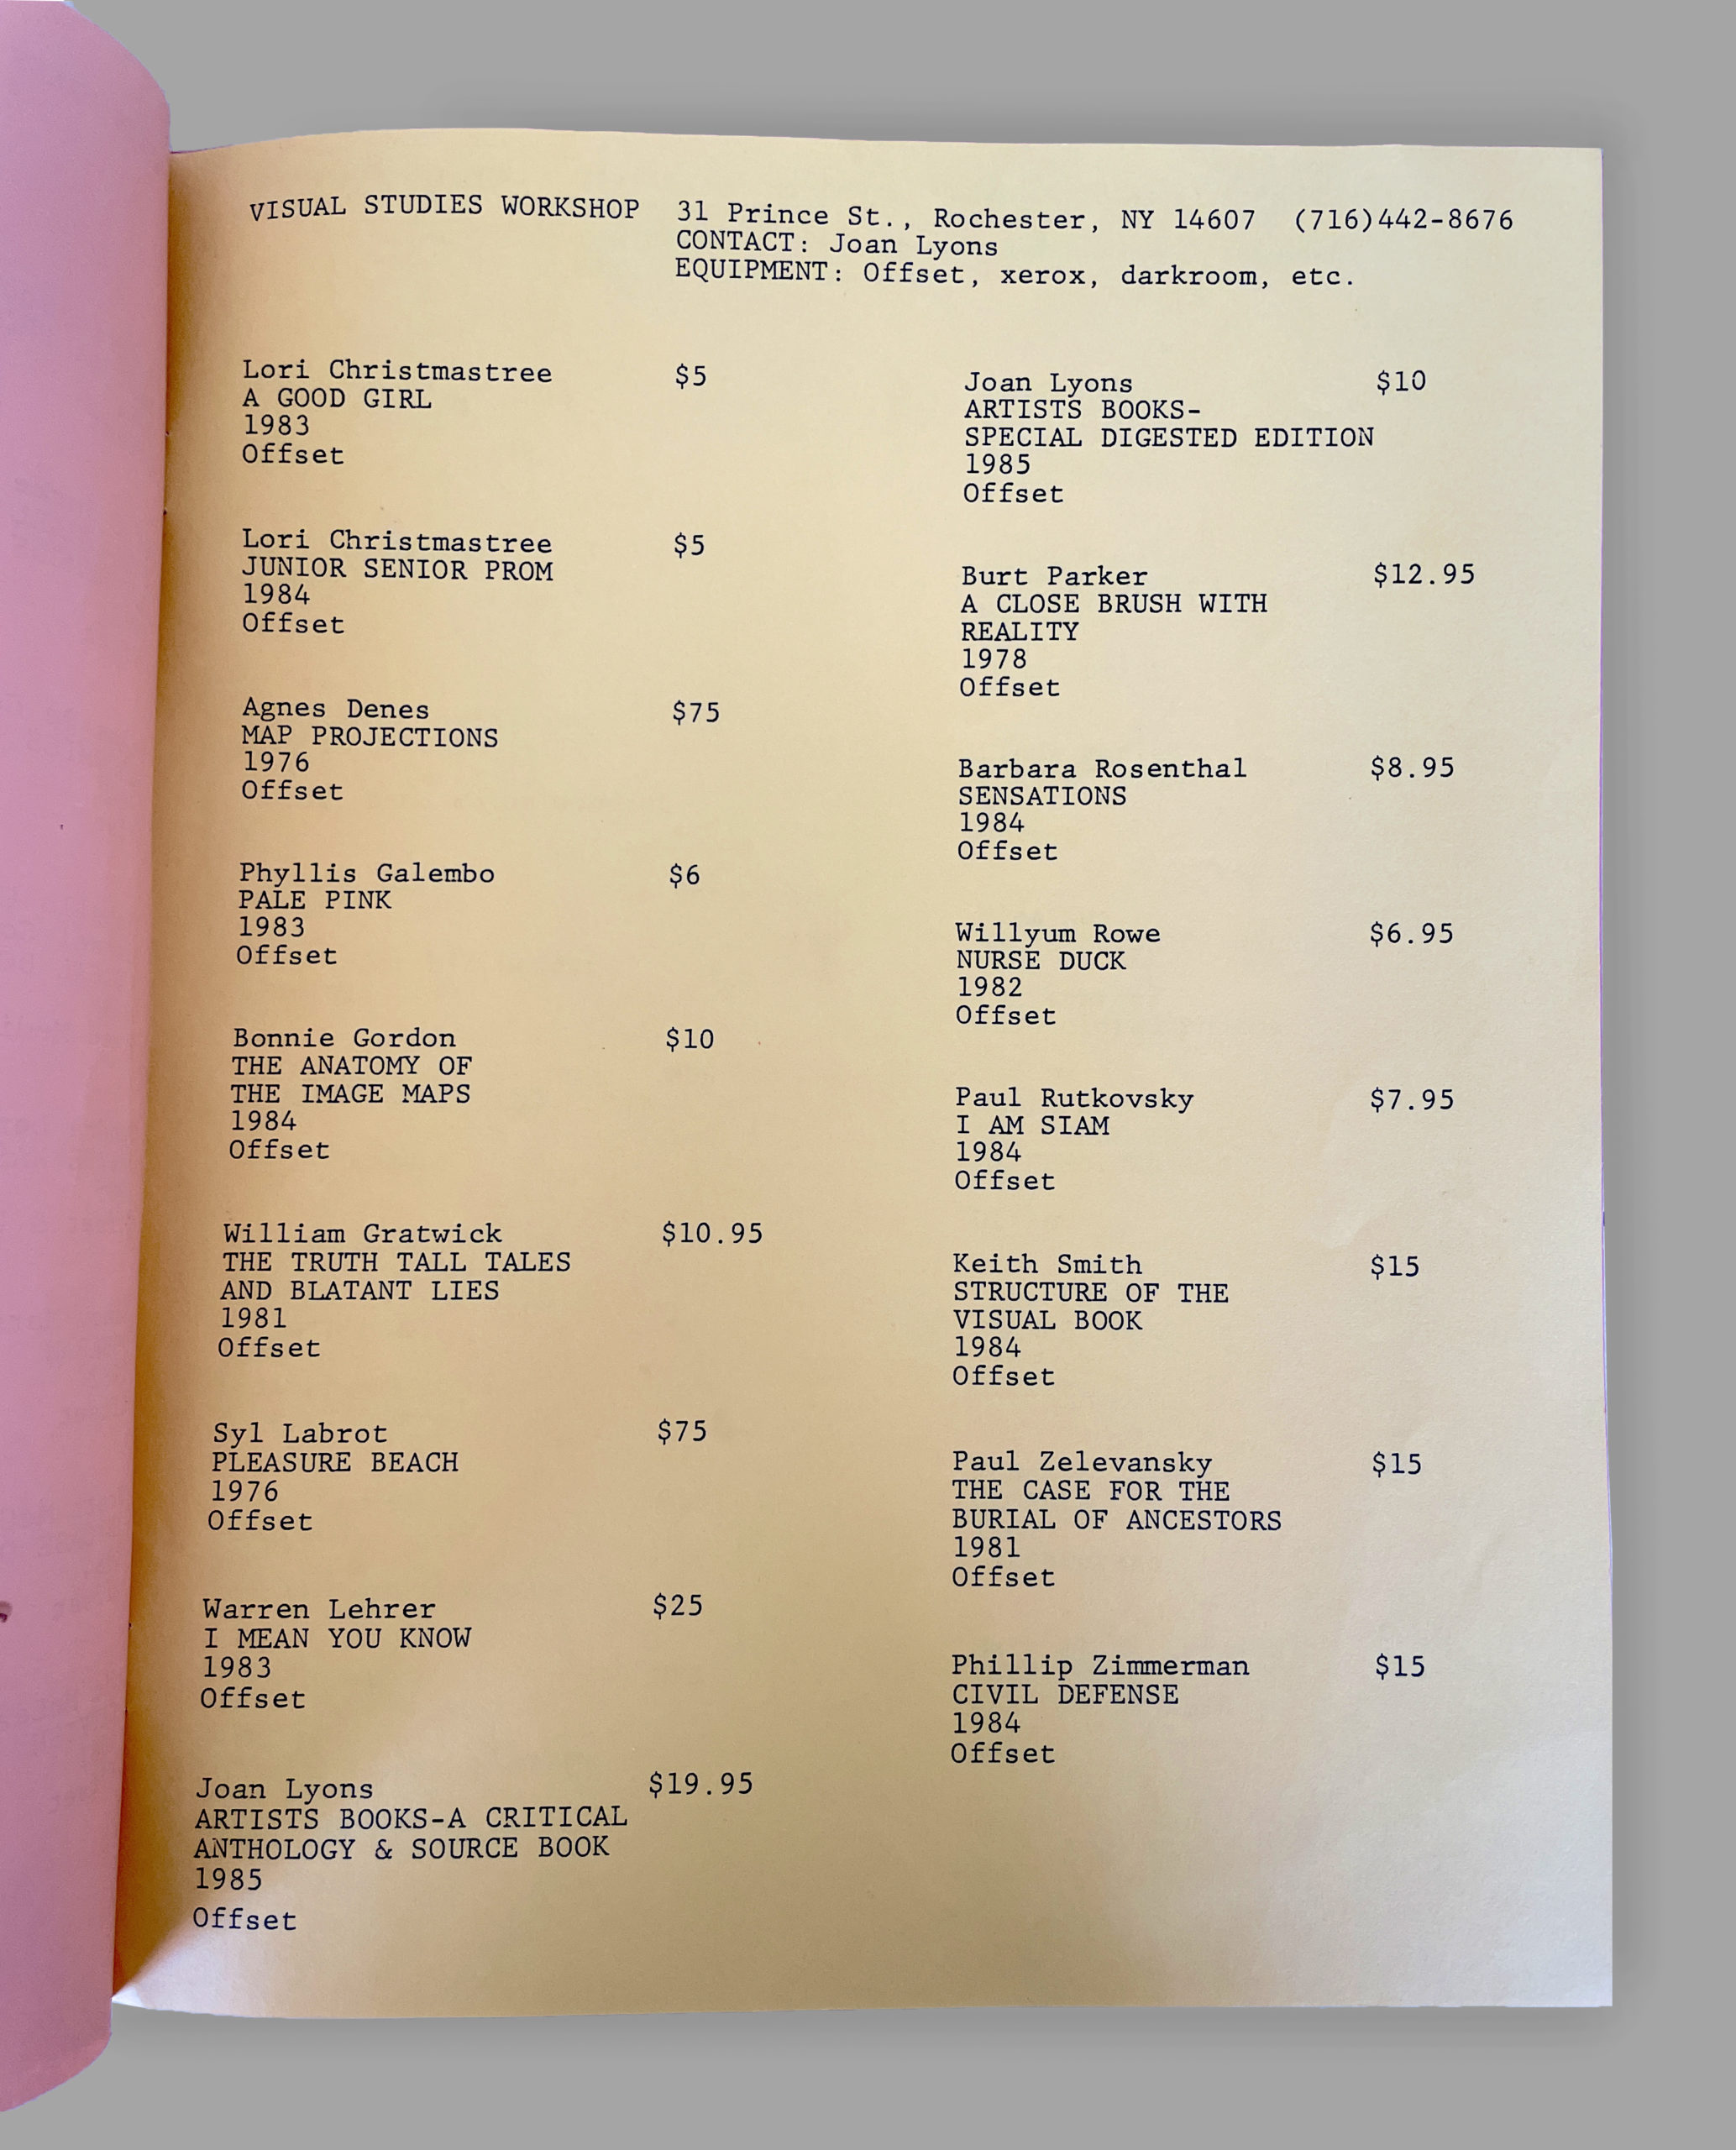 cream colored paper with typewriten checklist of artworks in two columns